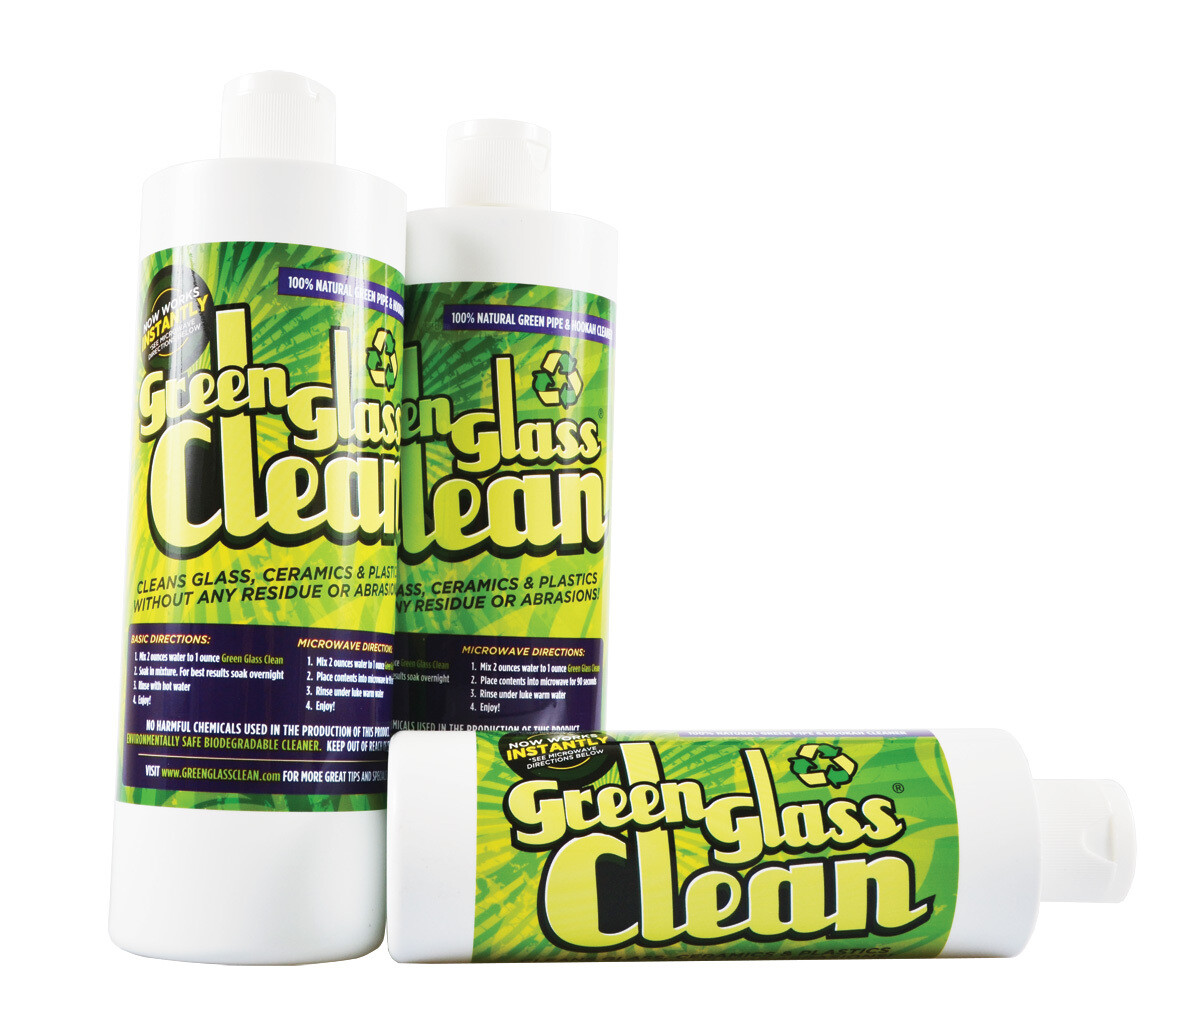 Green glass cleaner 16 ounce